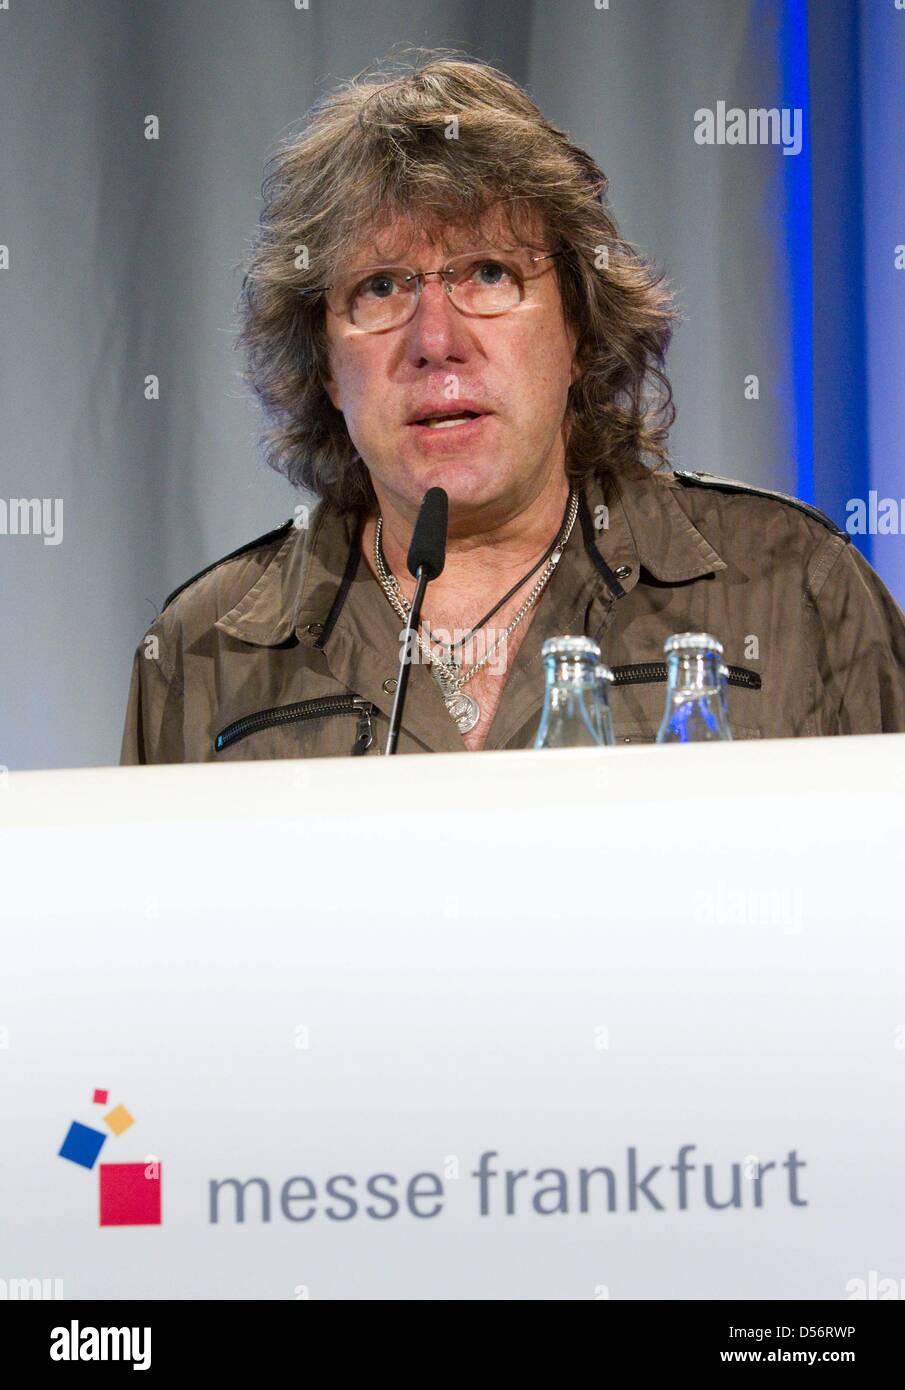 English keyboard player Keith Emerson receives the Frankfurt Music Prize 2010 in Frankfurt Main, Germany, 23 March 2010. Emerson, keyboard player and founding member of progressive rock band 'Emerson, Lake & Palmer' is awarded with the Frankfurt Music Prize 2010 on the eve of the 2010 Frankfurt Music Fair, the world's second-biggest trade fair for music industry. The Board of Trust Stock Photo